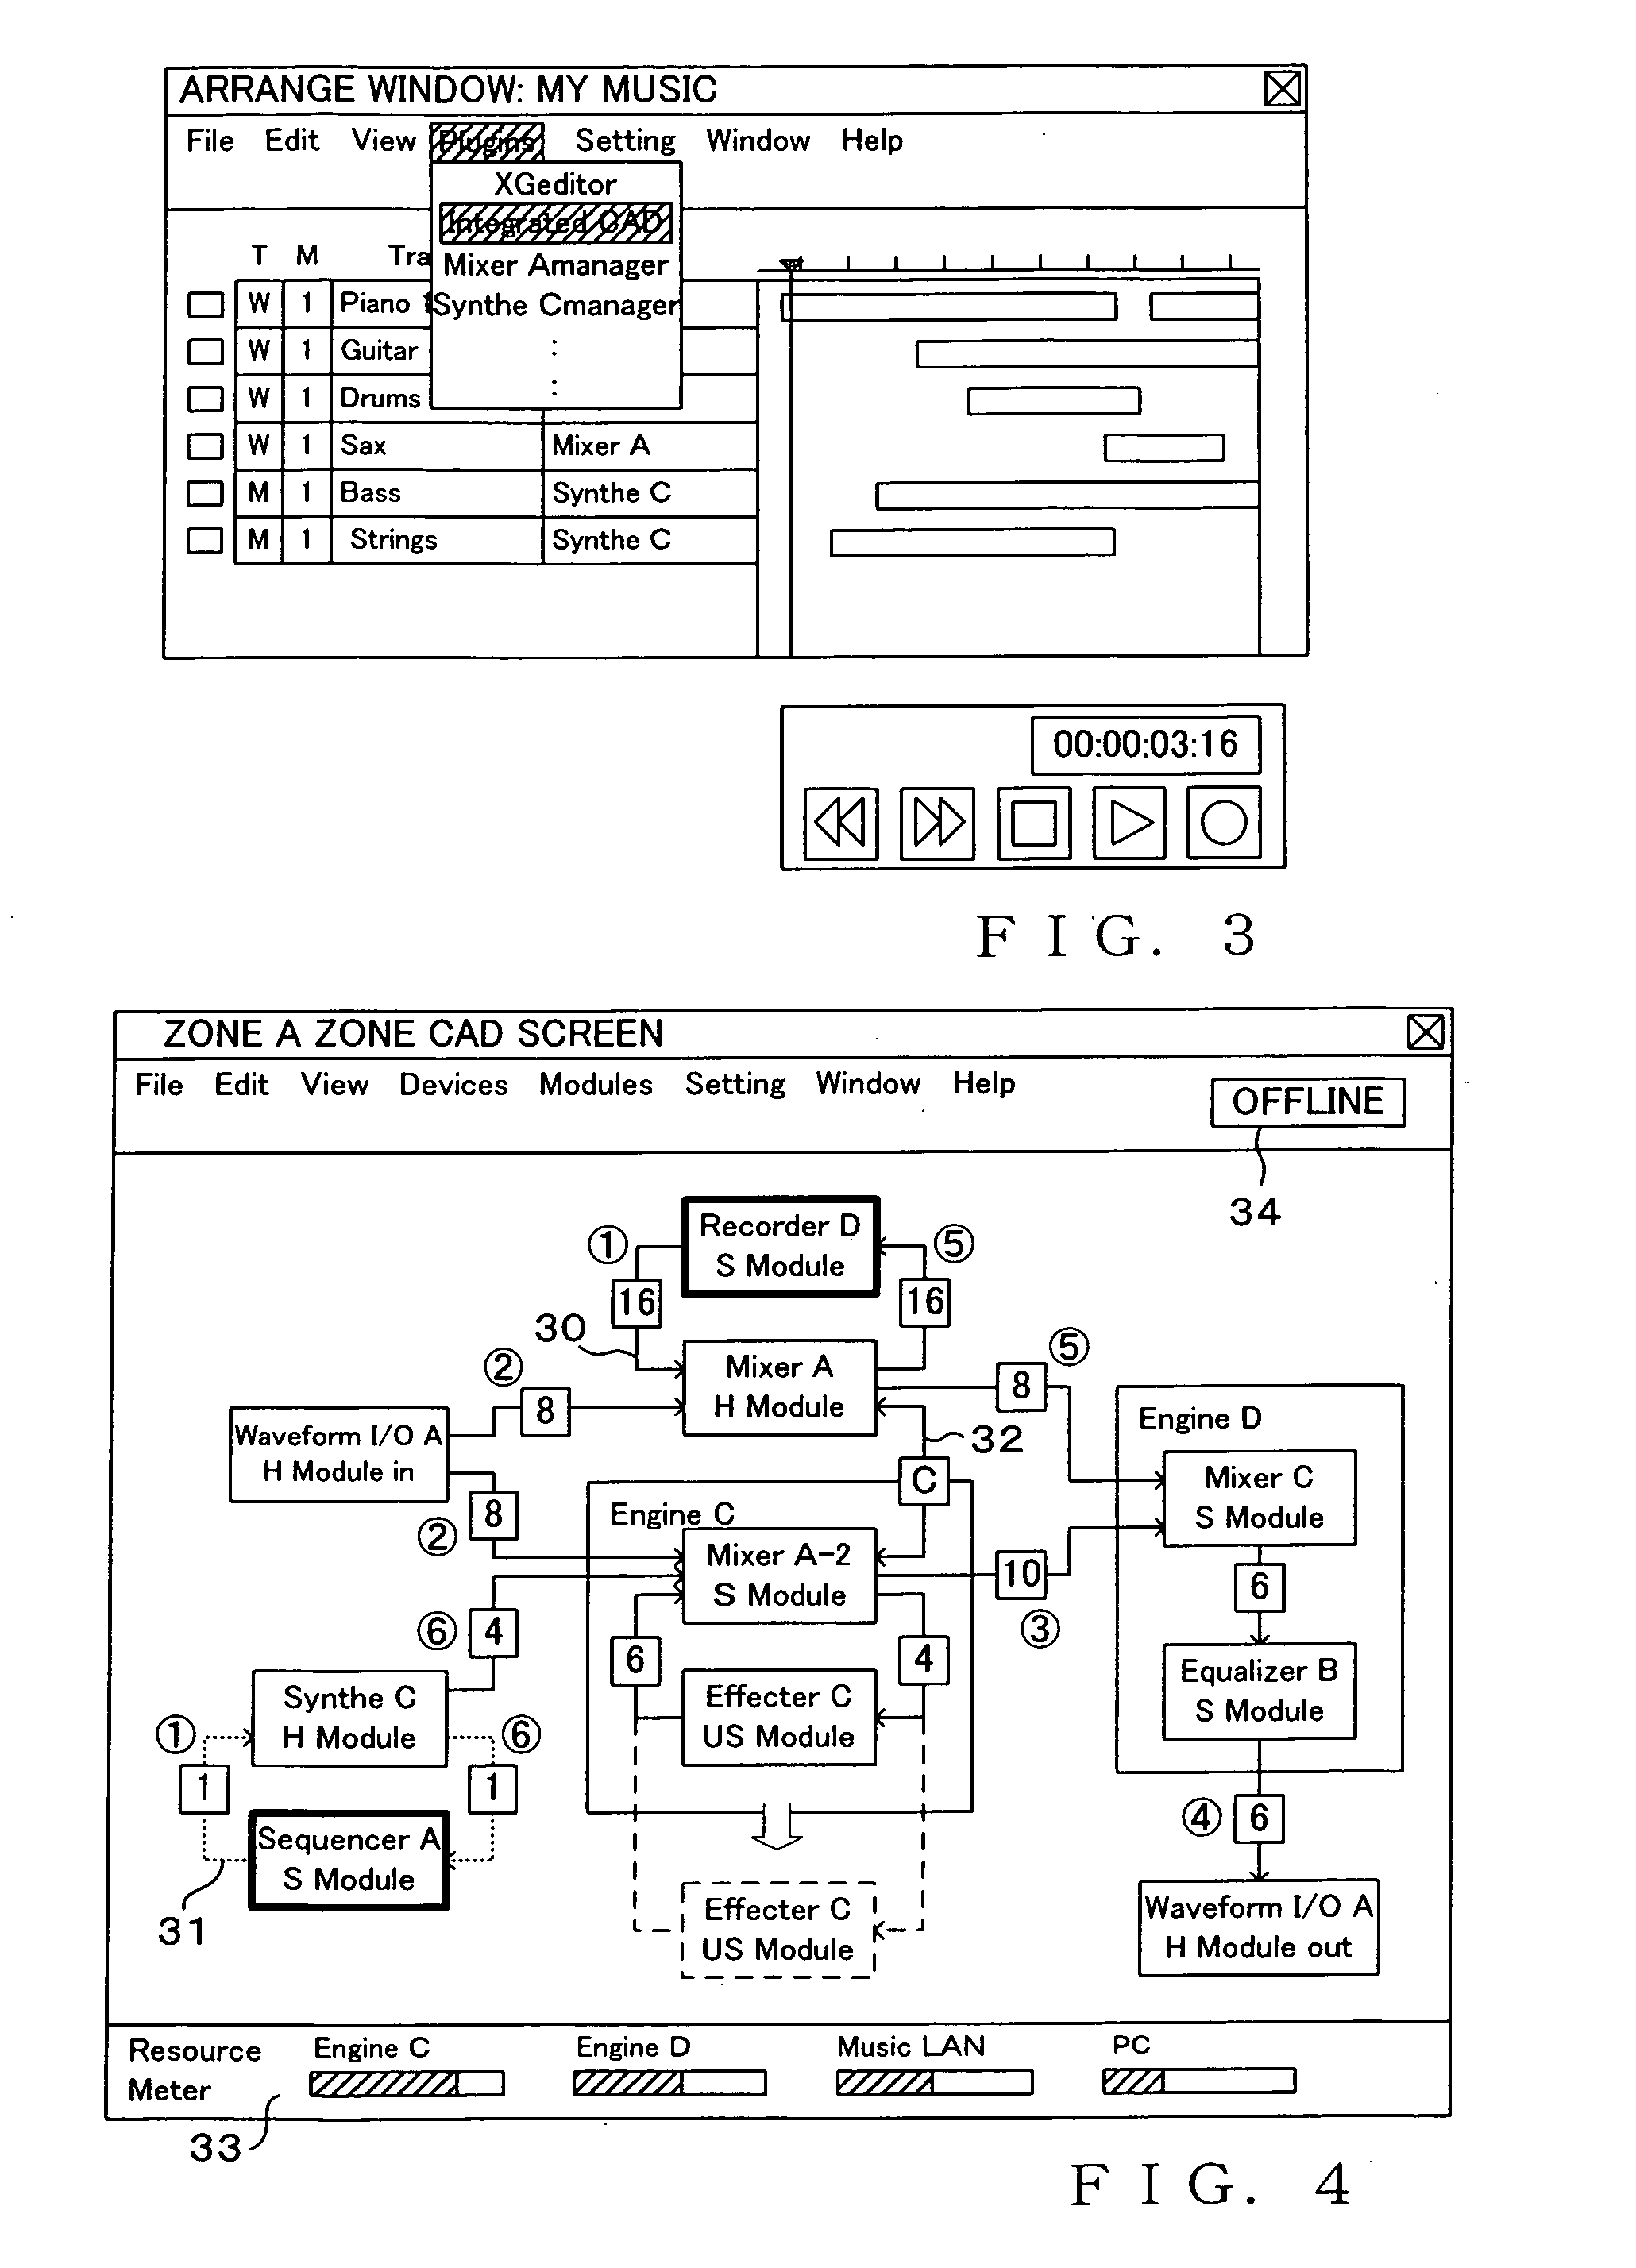 Control apparatus for music system comprising a plurality of equipments connected together via network, and integrated software for controlling the music system